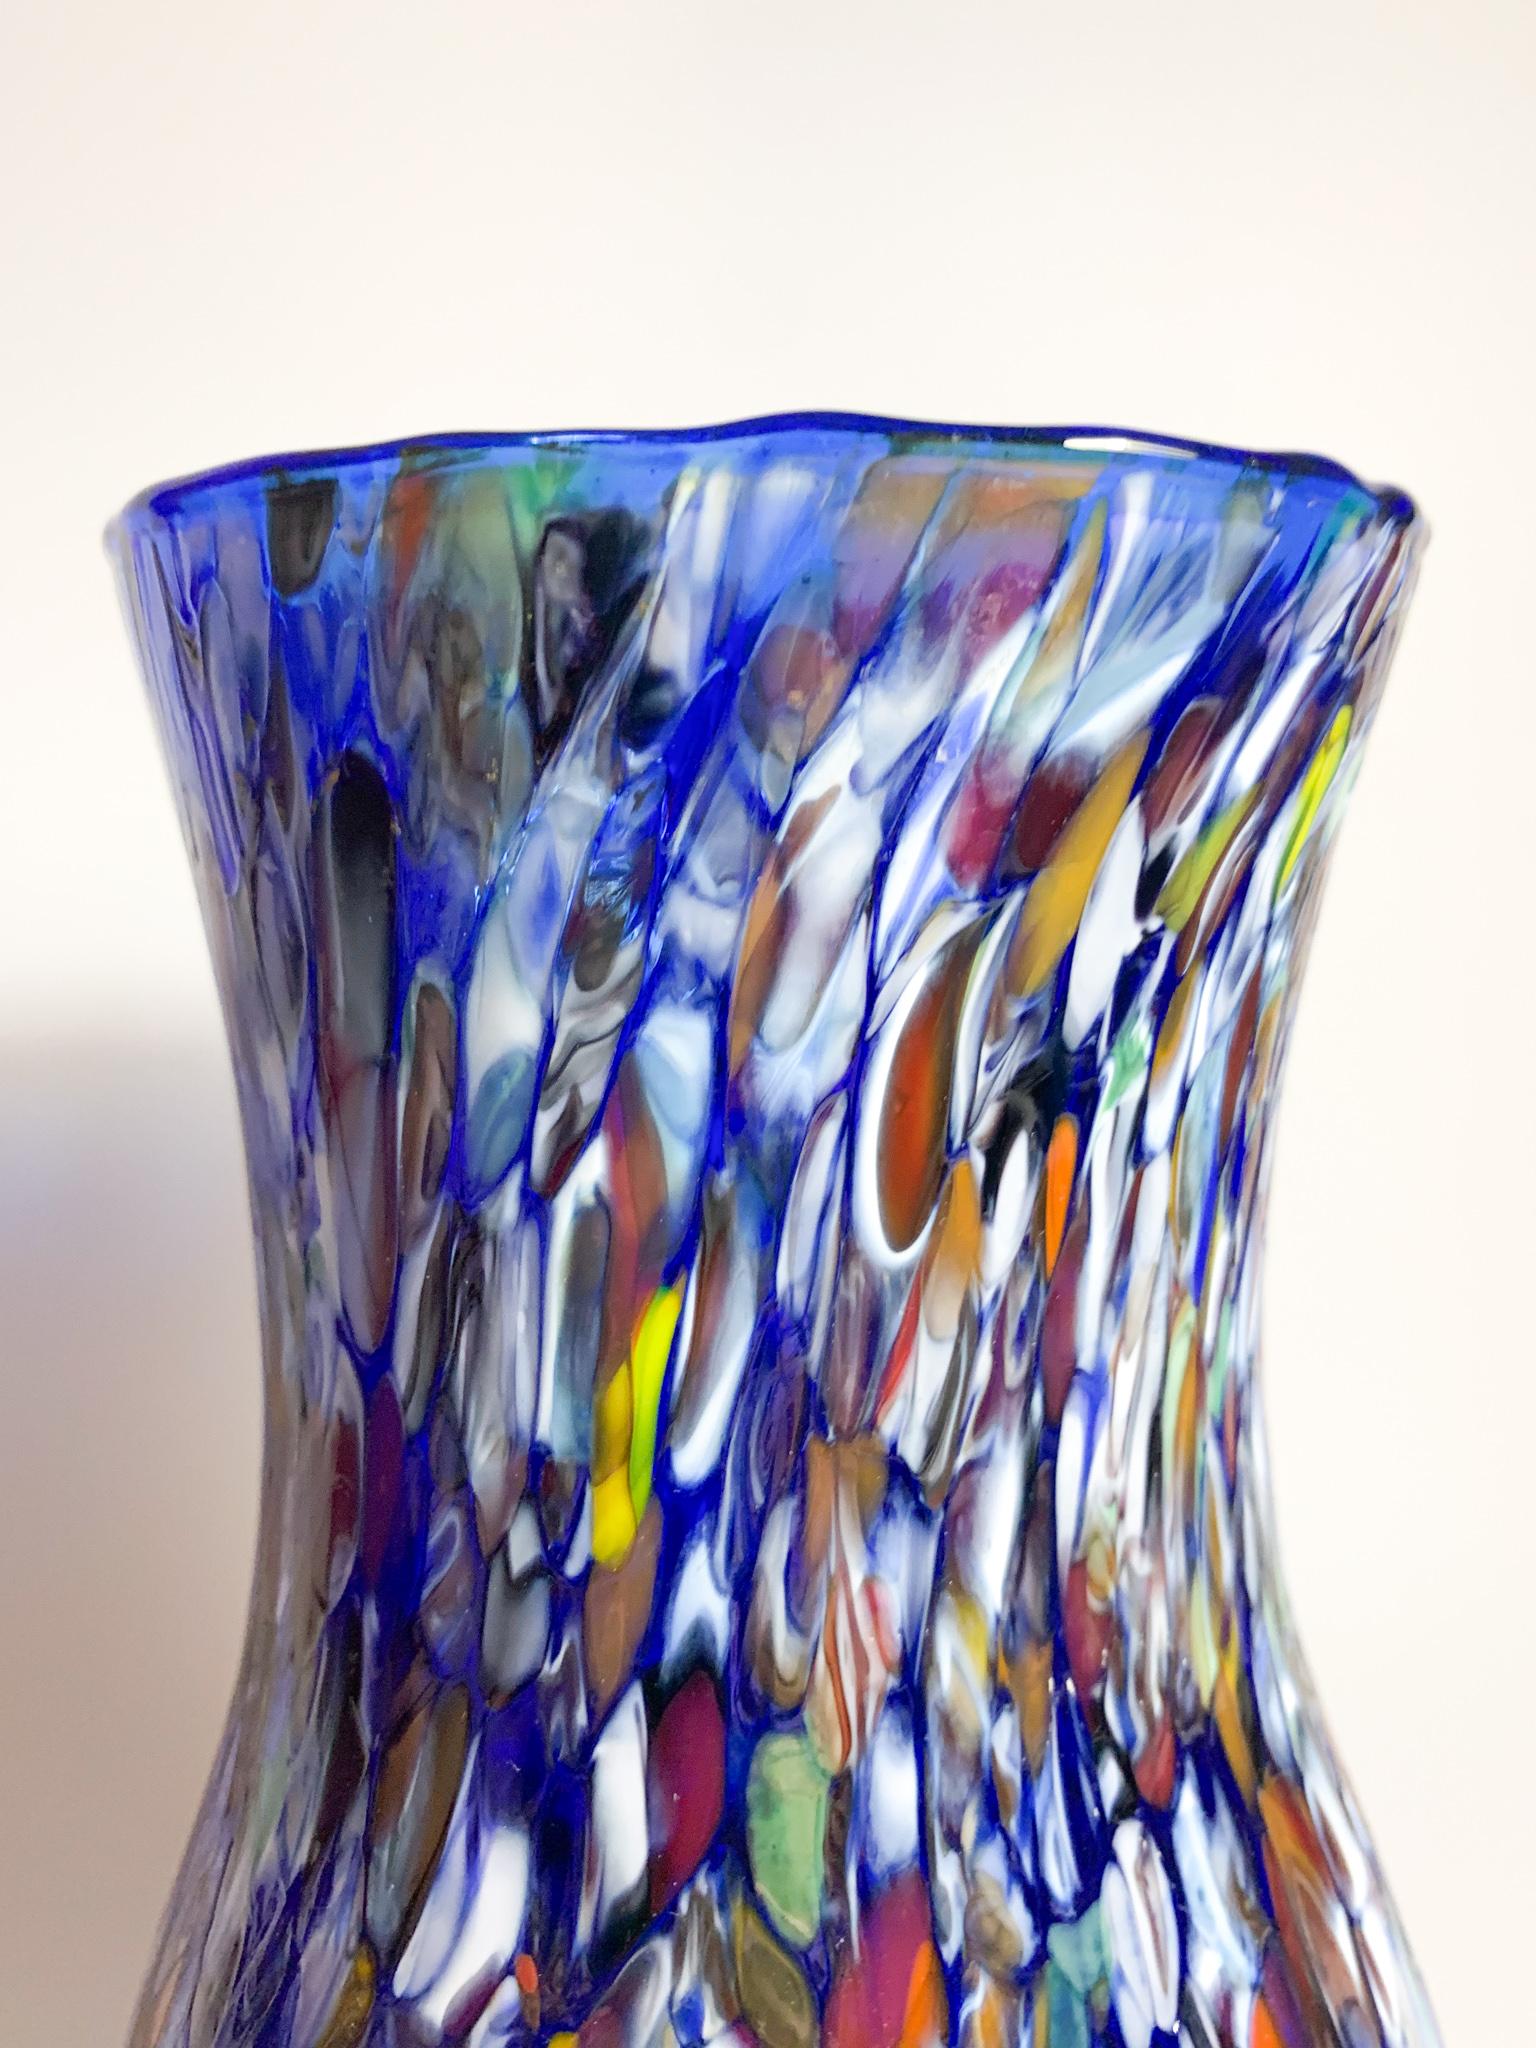 Blue Murano glass vase with Murrine, made by Fratelli Toso in the 1940s
Ø cm 11 h cm 22
Barovier & Toso is a glass factory, known for its handcrafted collections of decorative Murano glass in the 20th century. The chemical innovations of Angelo